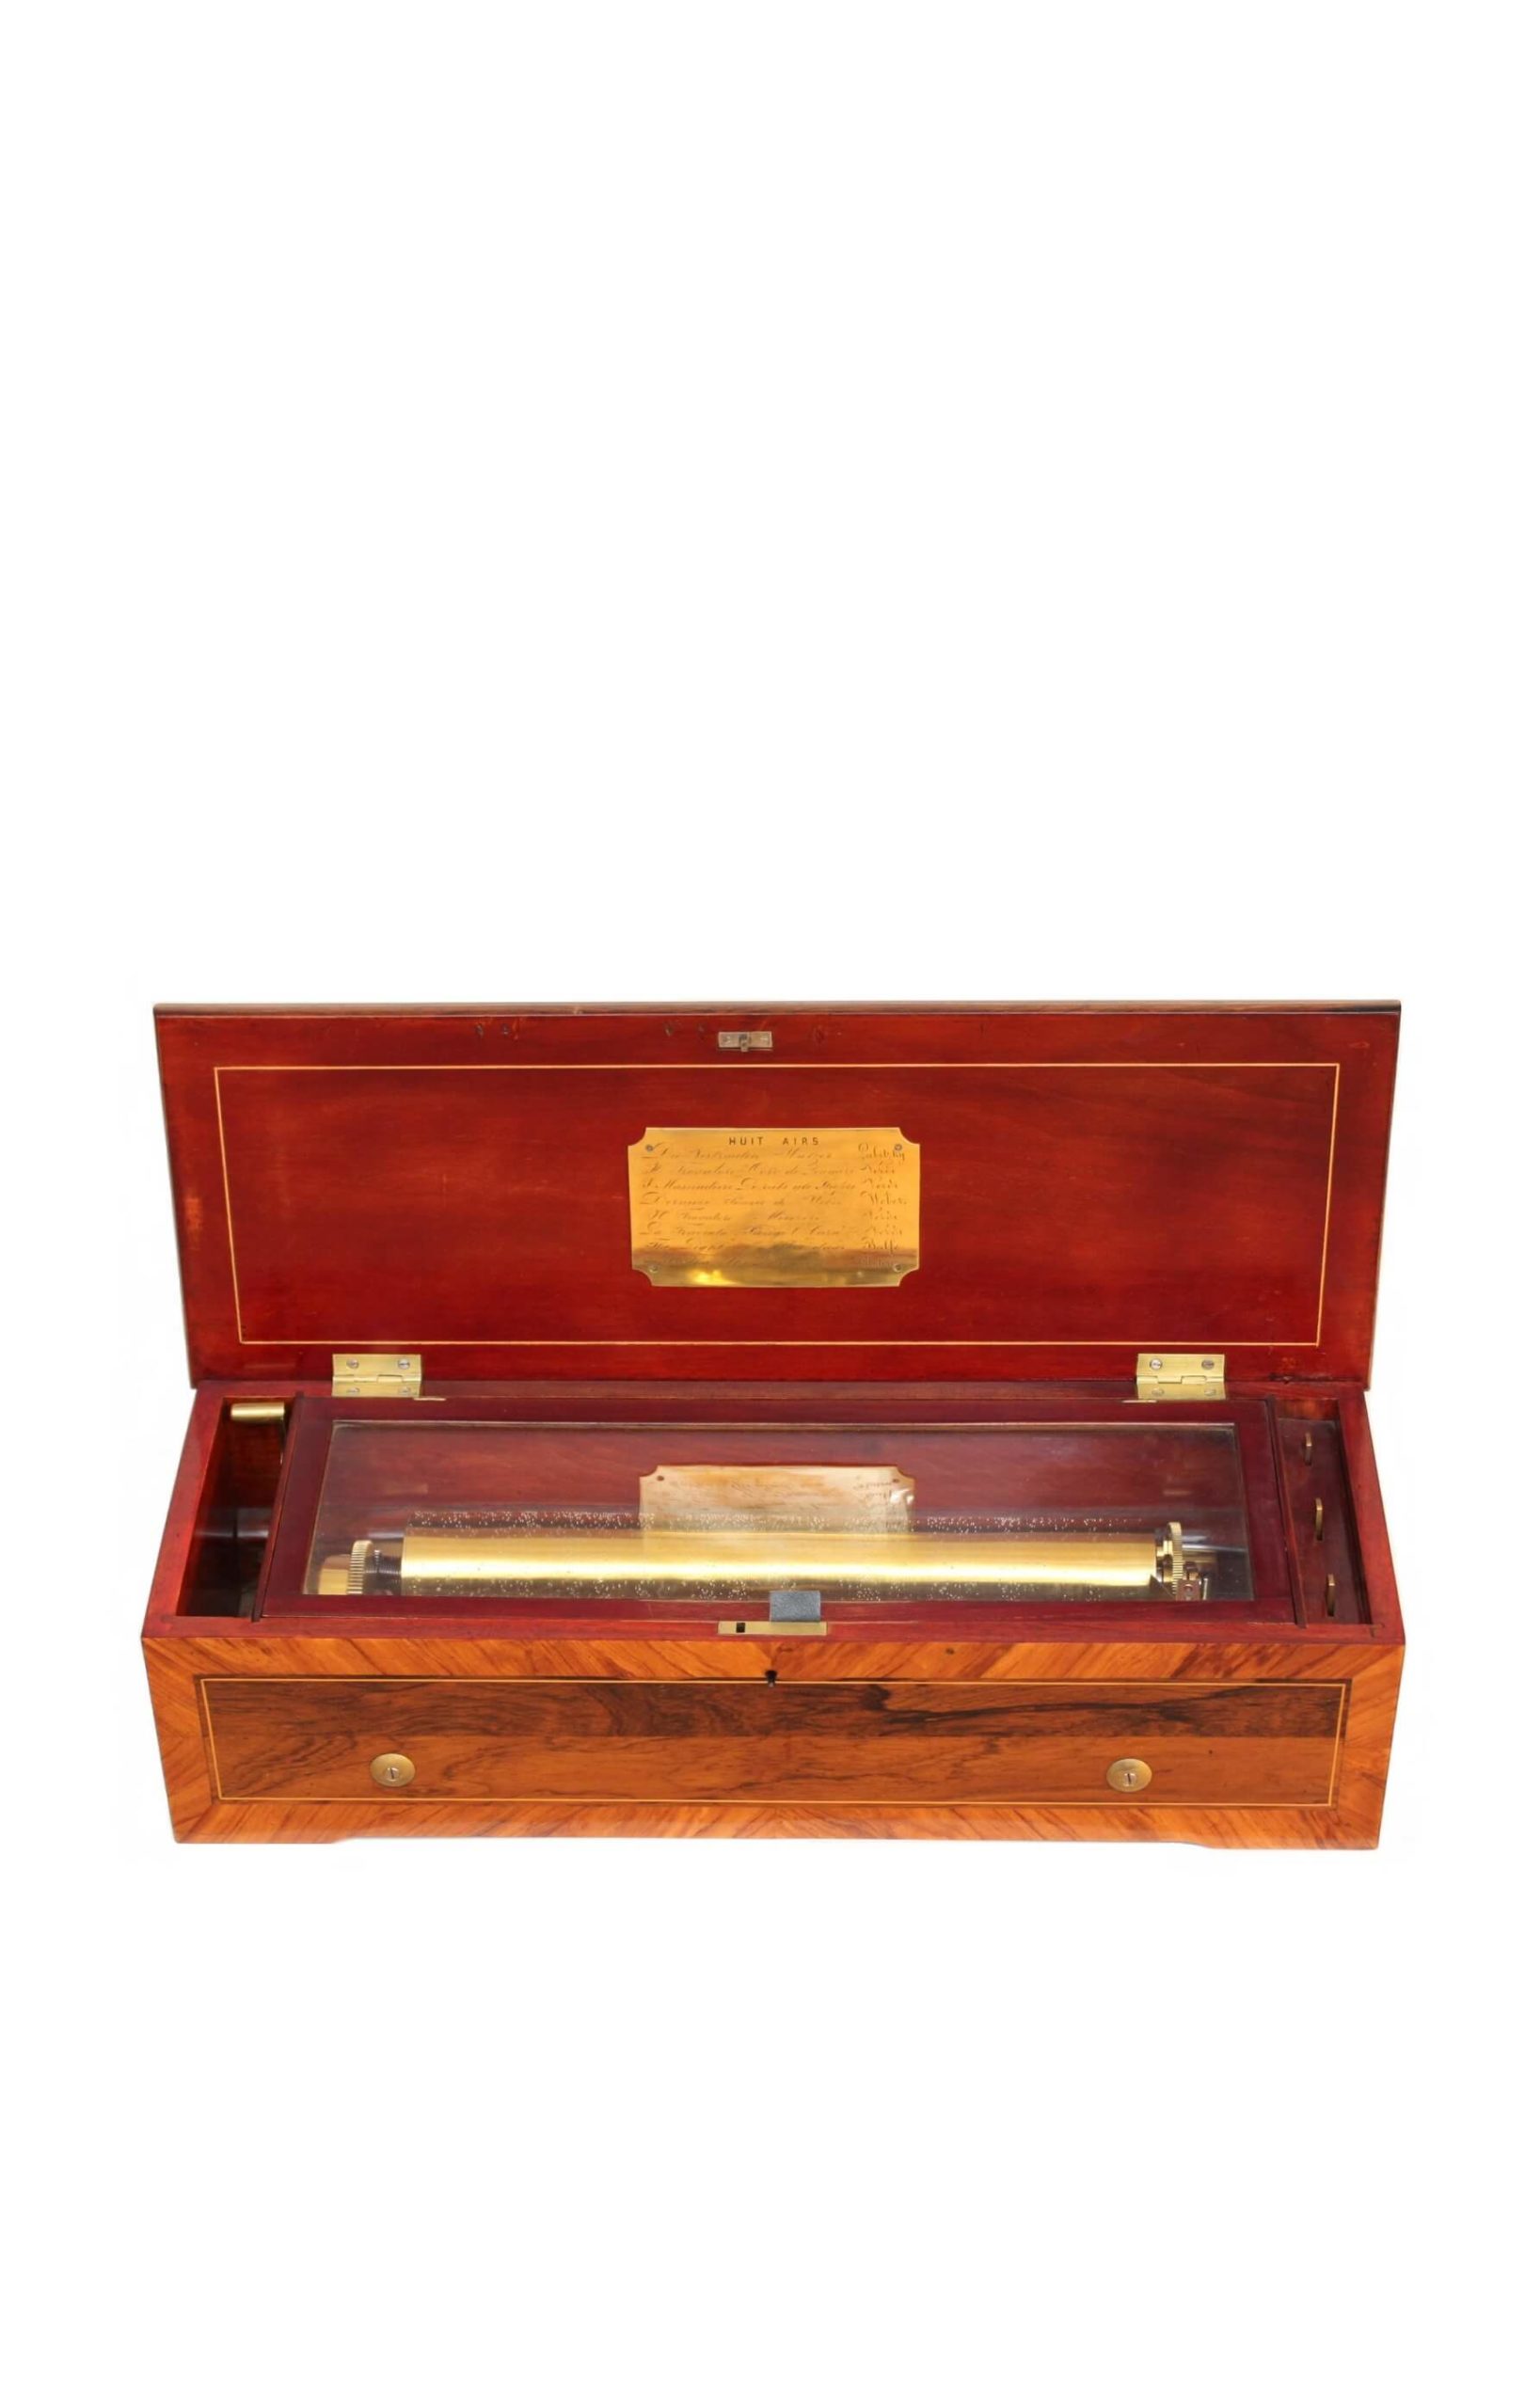 Swiss-LeCoultre-Geneva-rosewood-marquetry-antique-cylinder-music-box-mechanical-music-8 air-